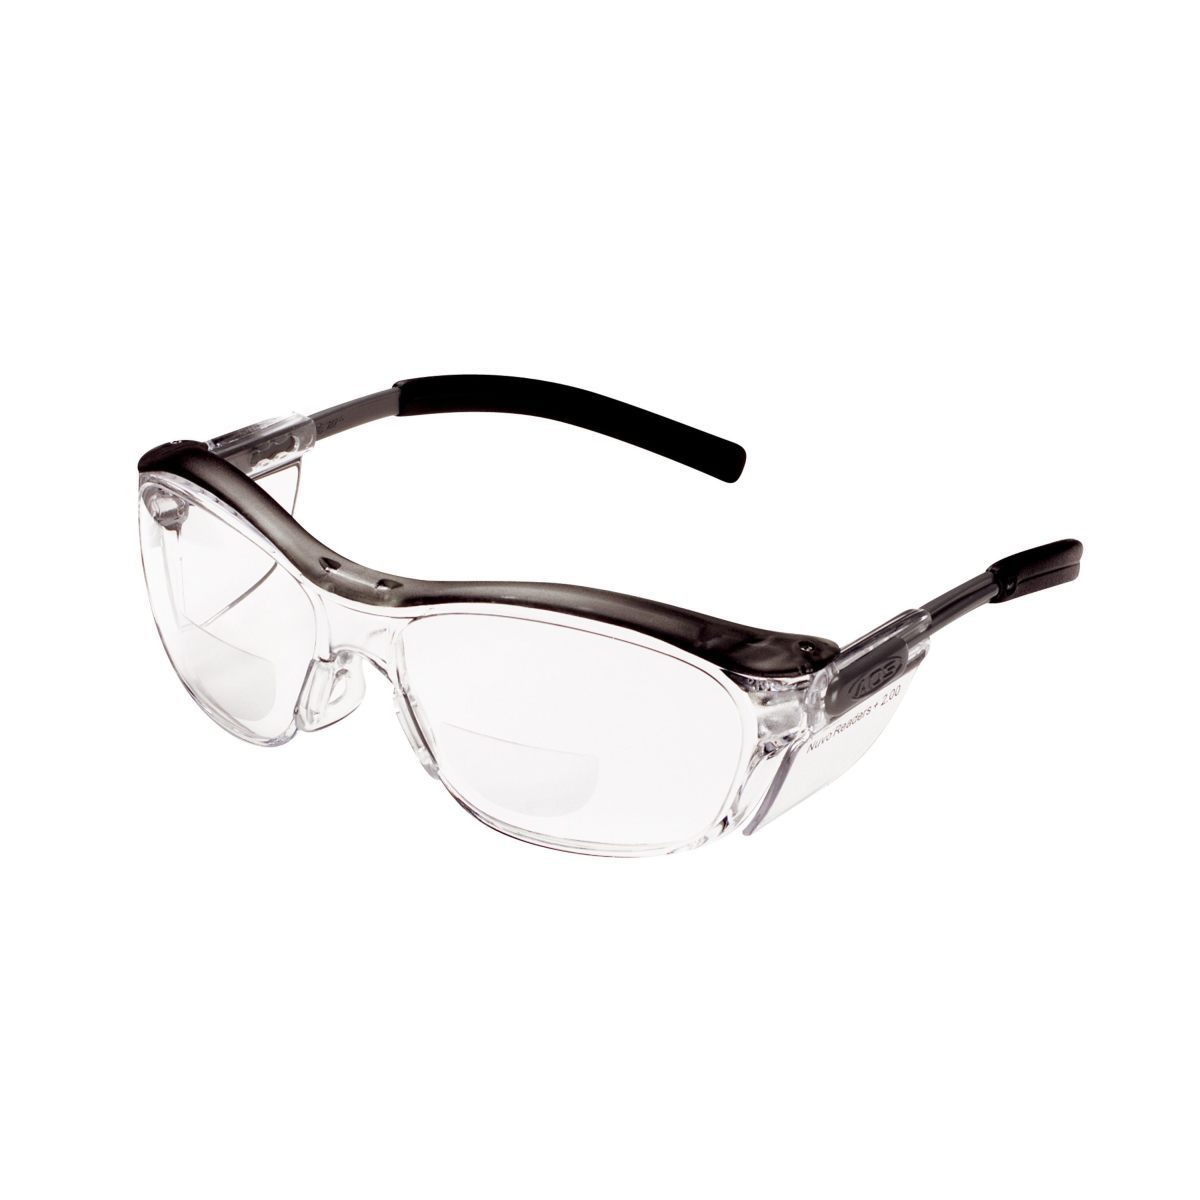 3M™ Nuvo™ Reader Protective Eyewear 11435-00000-20 Clear Lens, Gray Frame, +2.0 Diopter (Availability restrictions apply.)